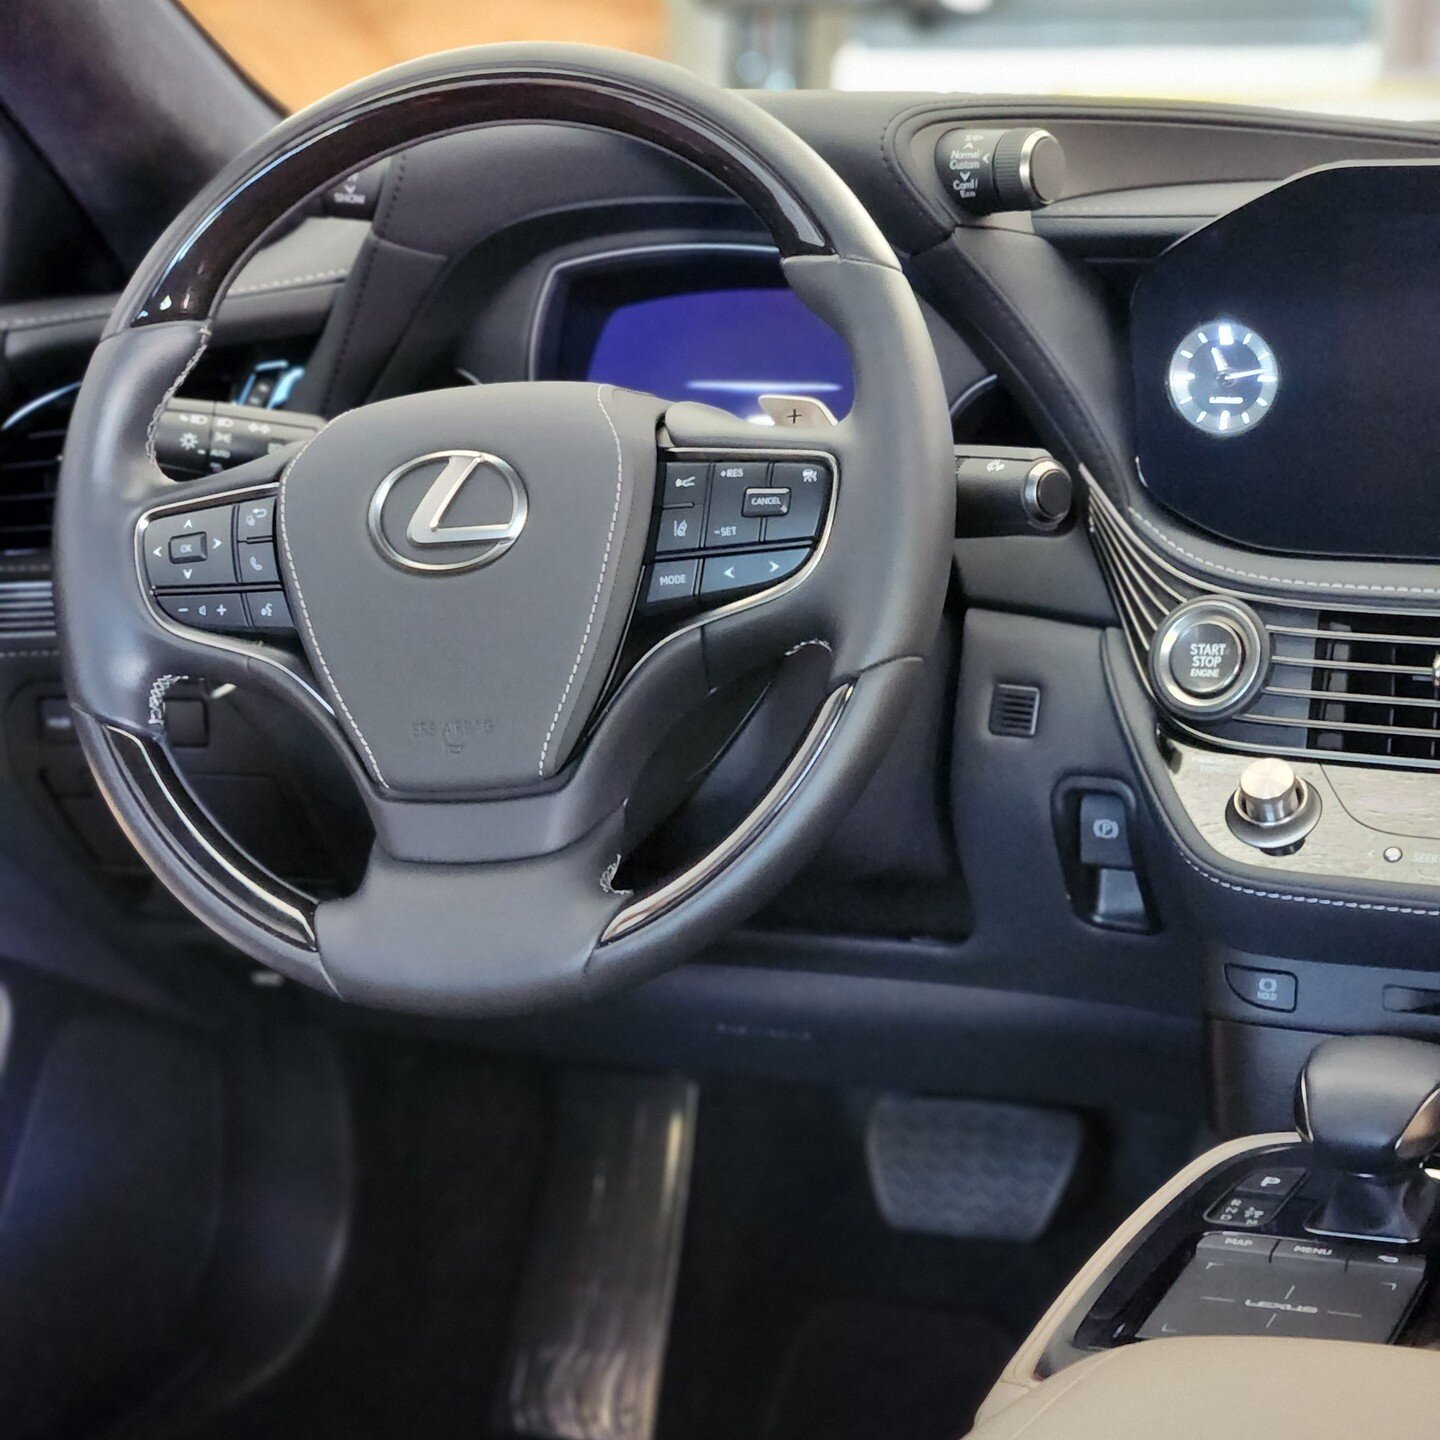 Details, details, details. It's all in the details when it comes to your car. A fresh, clean interior not only looks great but feels great too! 
Our 5-star rated mobile detailing company offers an Interior Detail and Shampoo service that will leave y